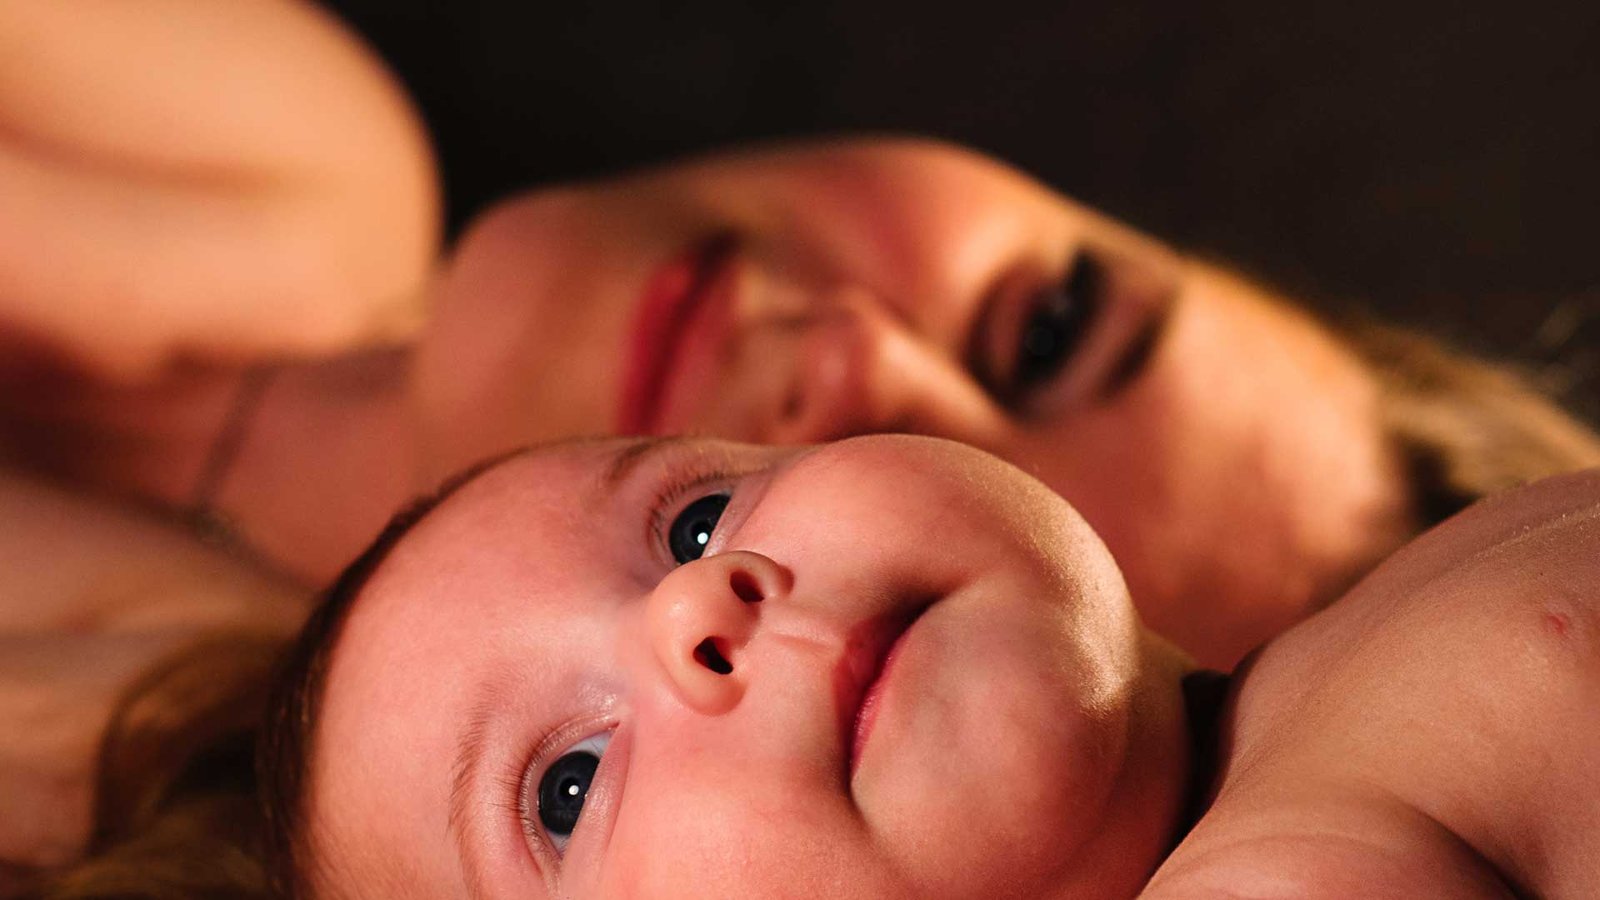 What You Should Know about Baby’s Breastfeeding Prep